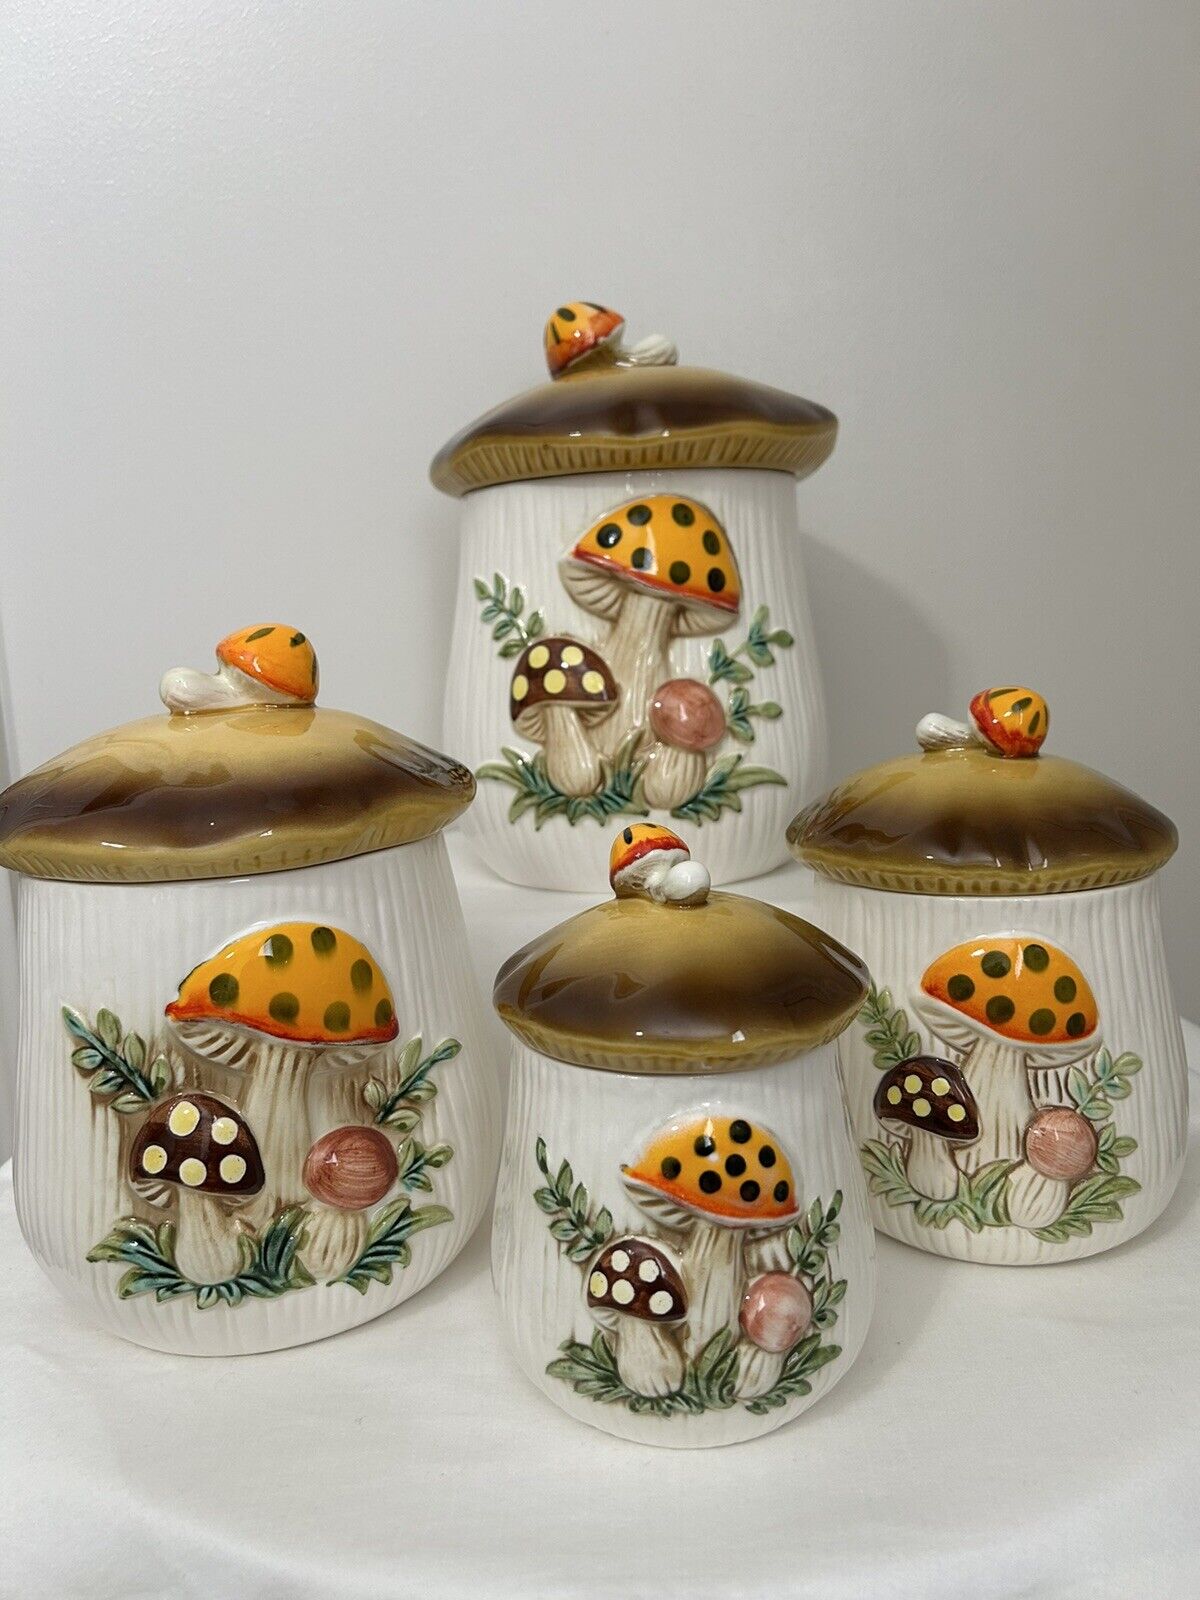 Sears Roebuck and Co Vintage Merry Mushroom Canisters Set of 4 Cottage core